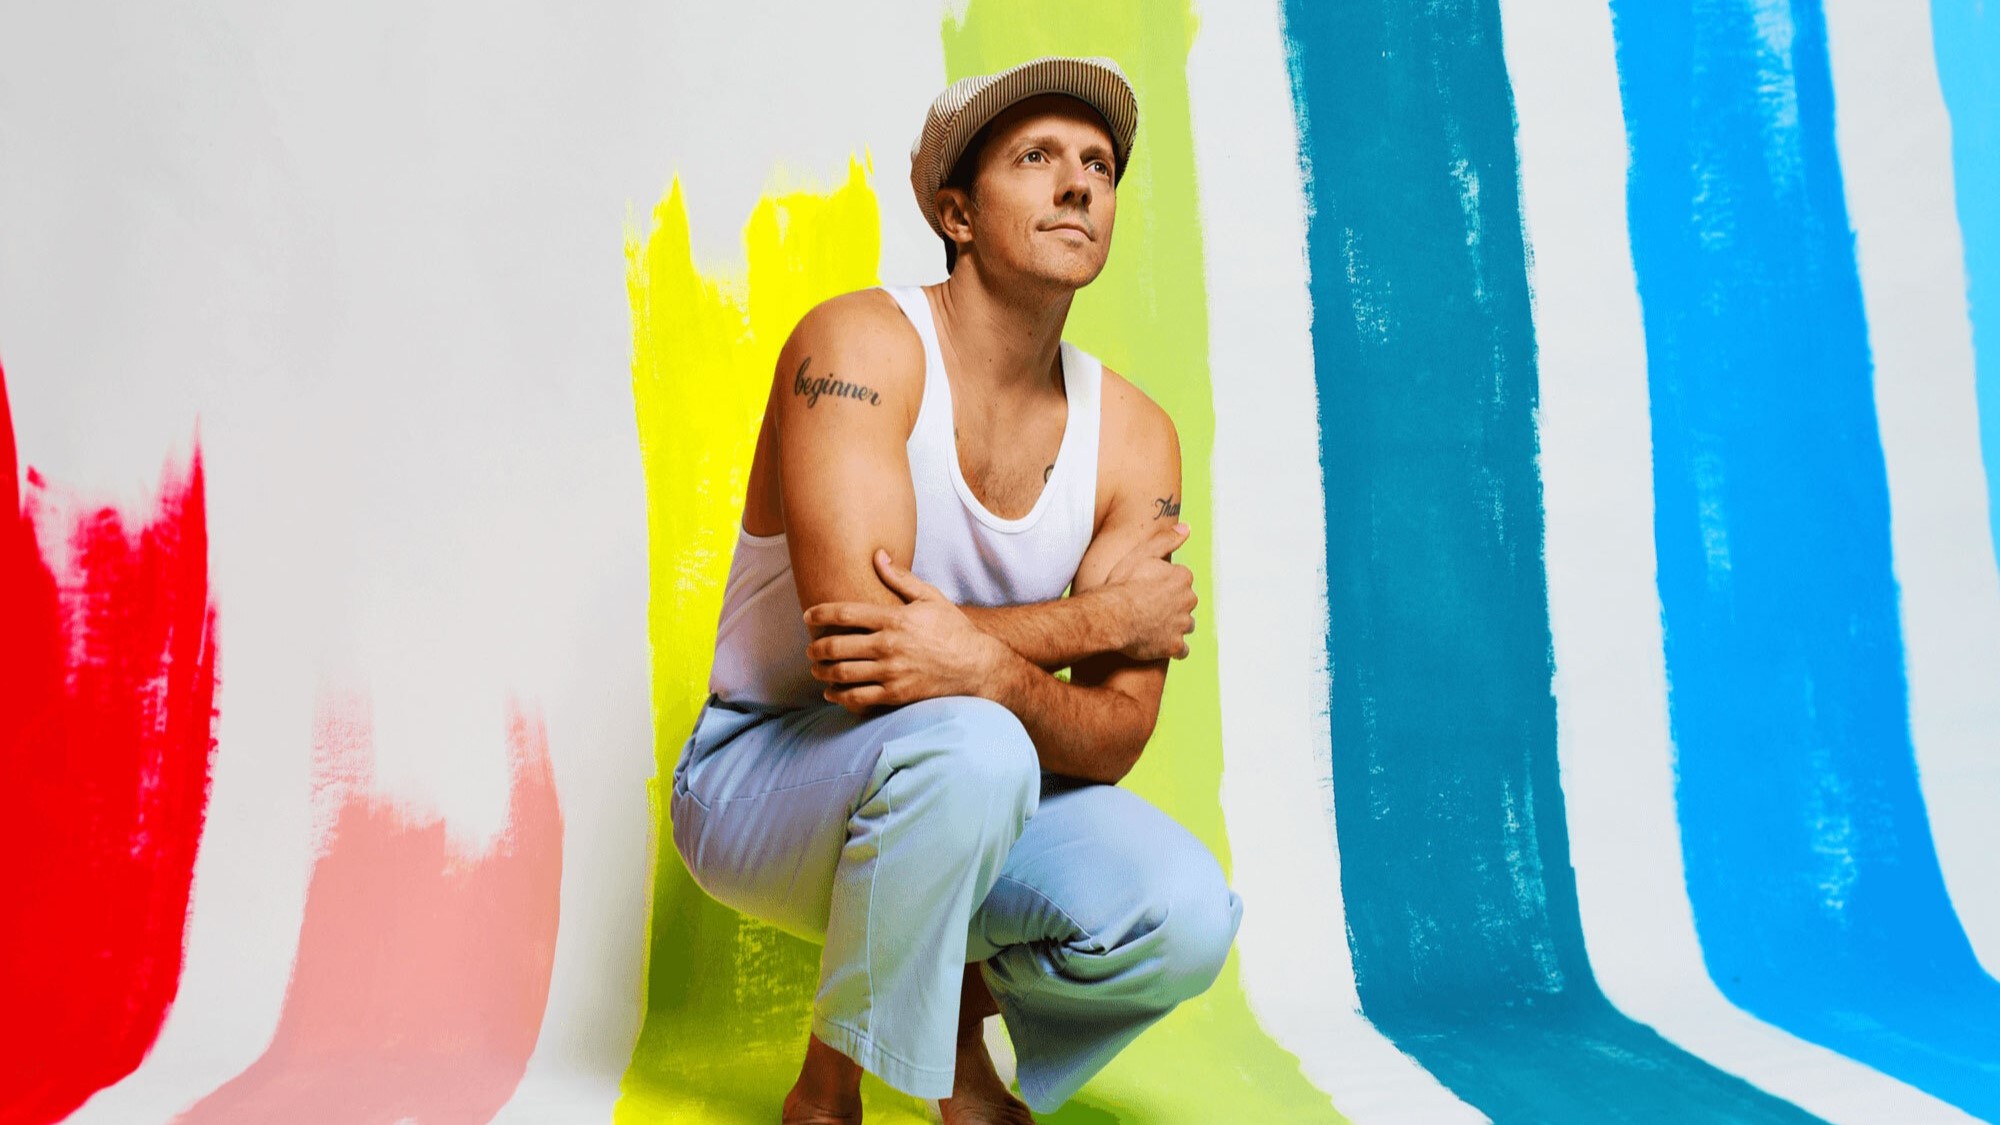 Singer-songwriter Jason Mraz on the inspiration behind his tour “Mystical Magical Rhythmical Radical Ride”: “… enjoy the ride and be as expressive as you can or want.”